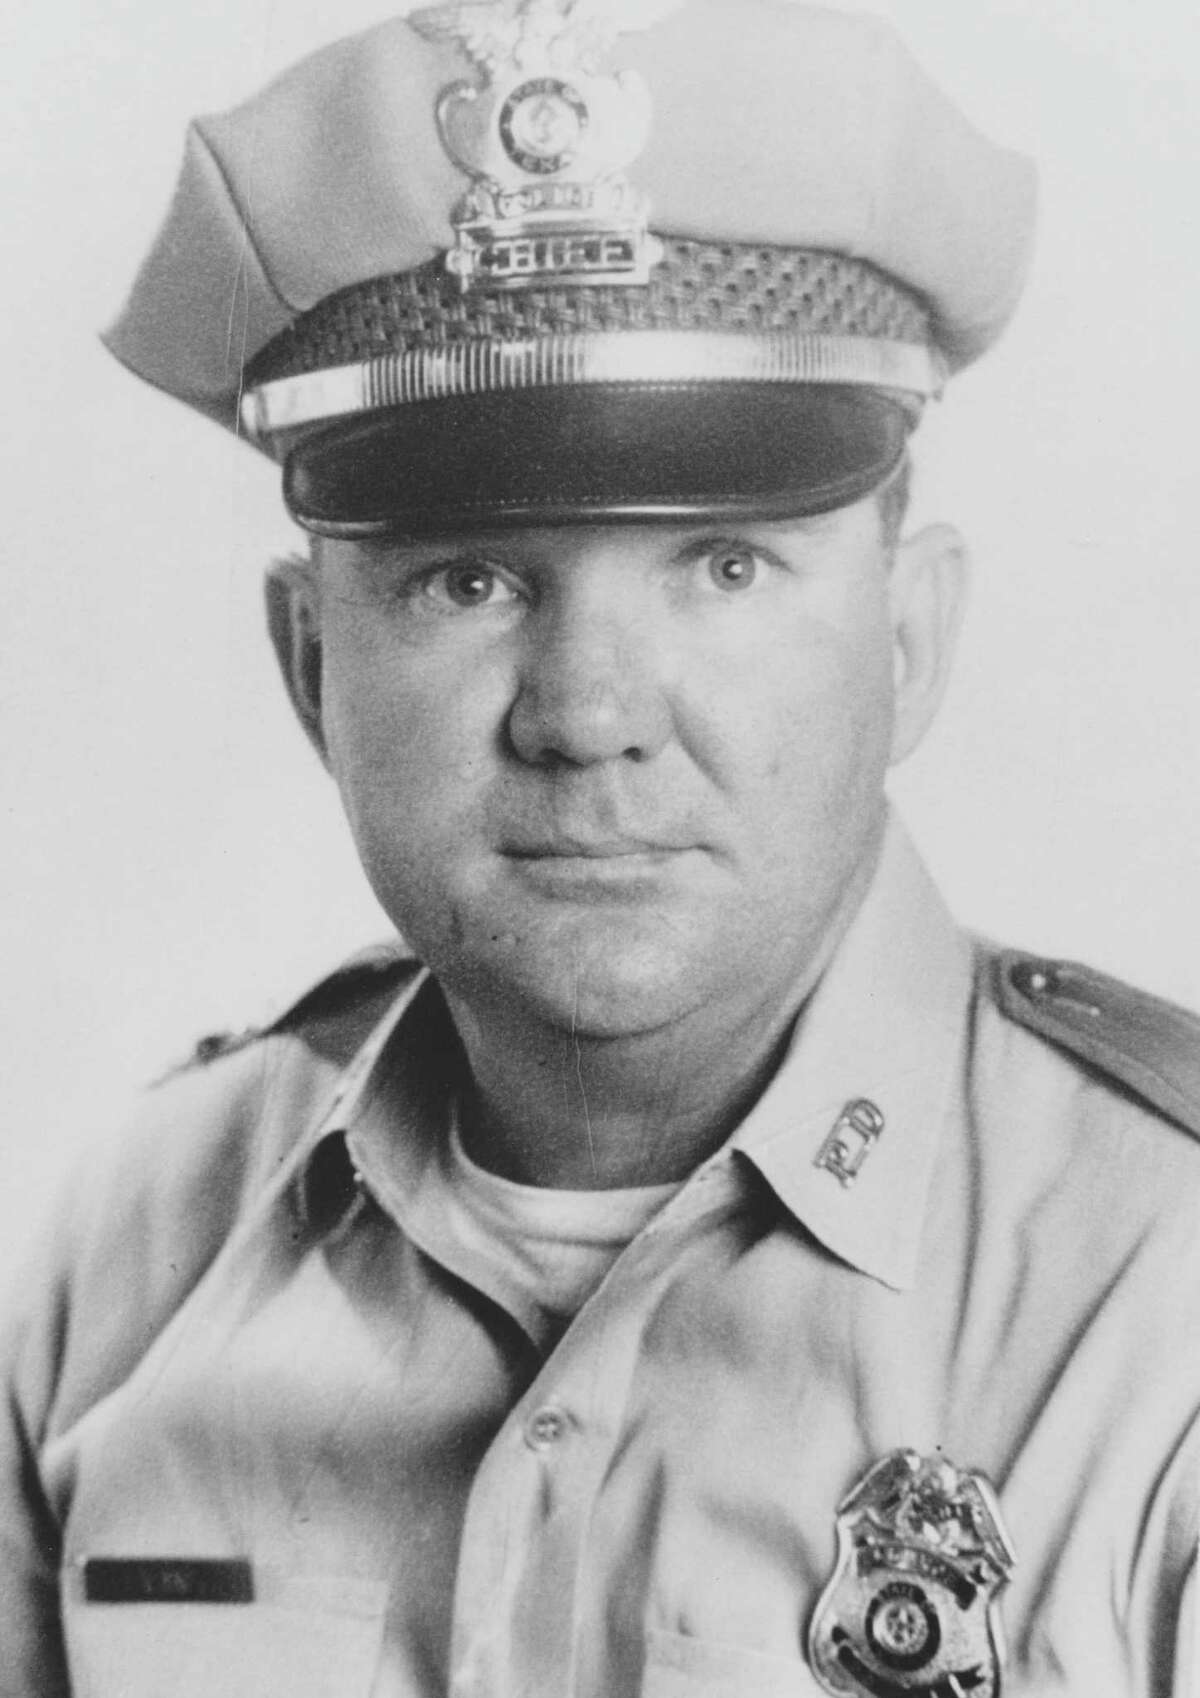 Larry Evans Sr. came to Conroe in 1957 and joined the Conroe police force. He was named Police Chief in 1964.